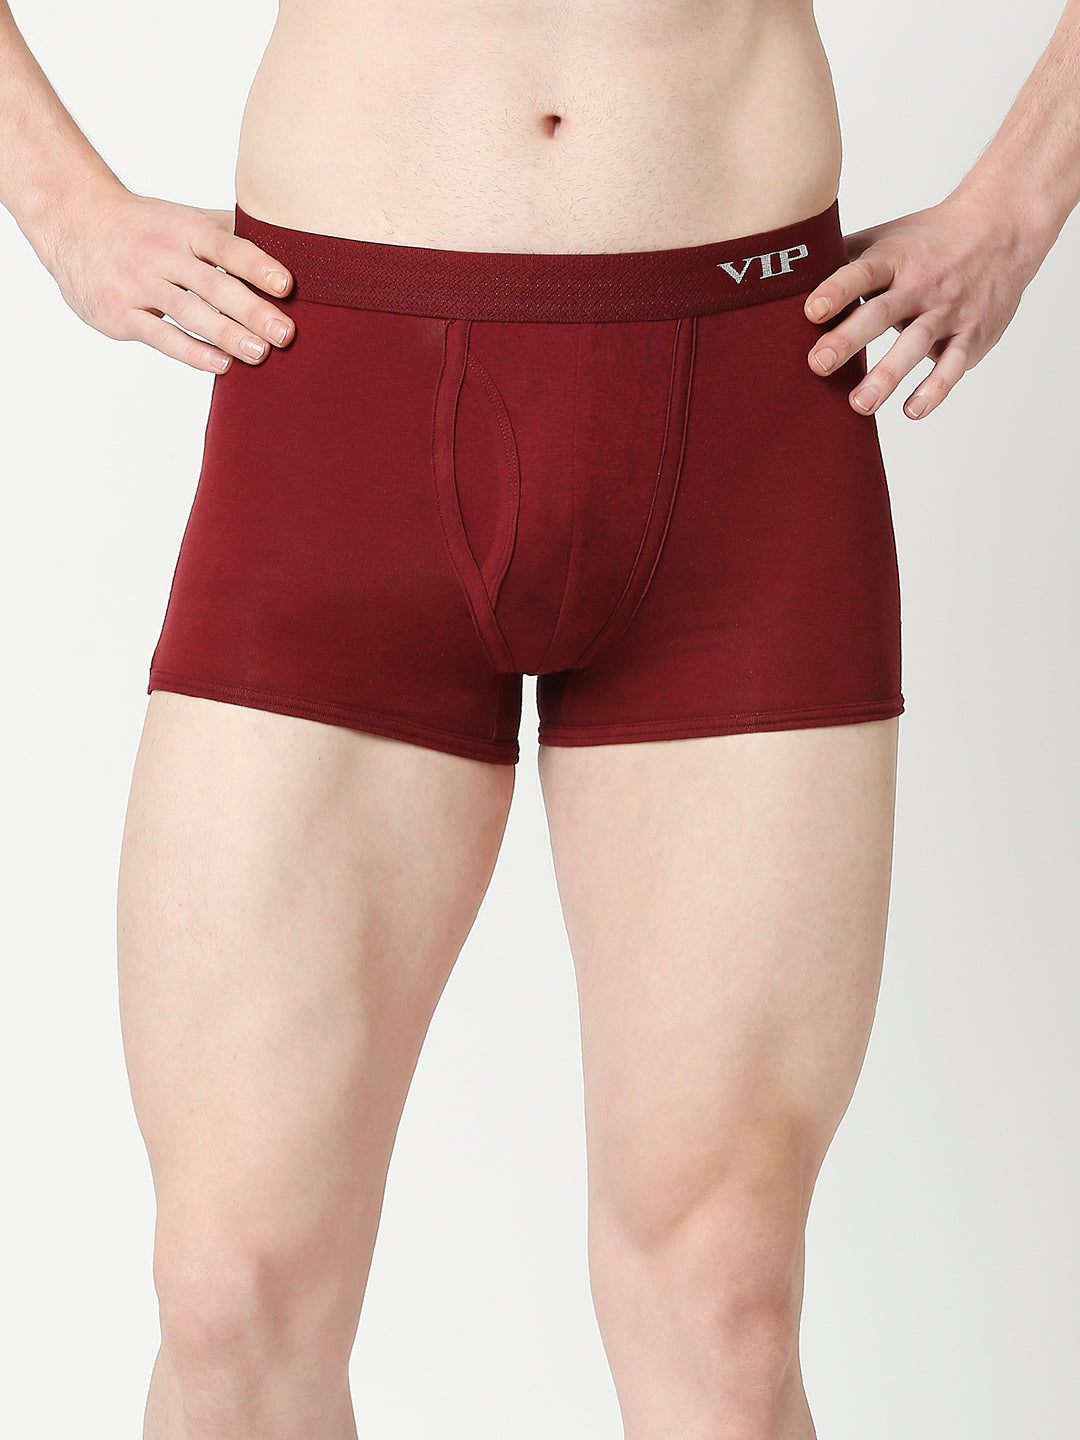 Sensory Snug Fit Cotton Modal Elastane Stretch Breathable Trunks in Assorted Colors - AS04